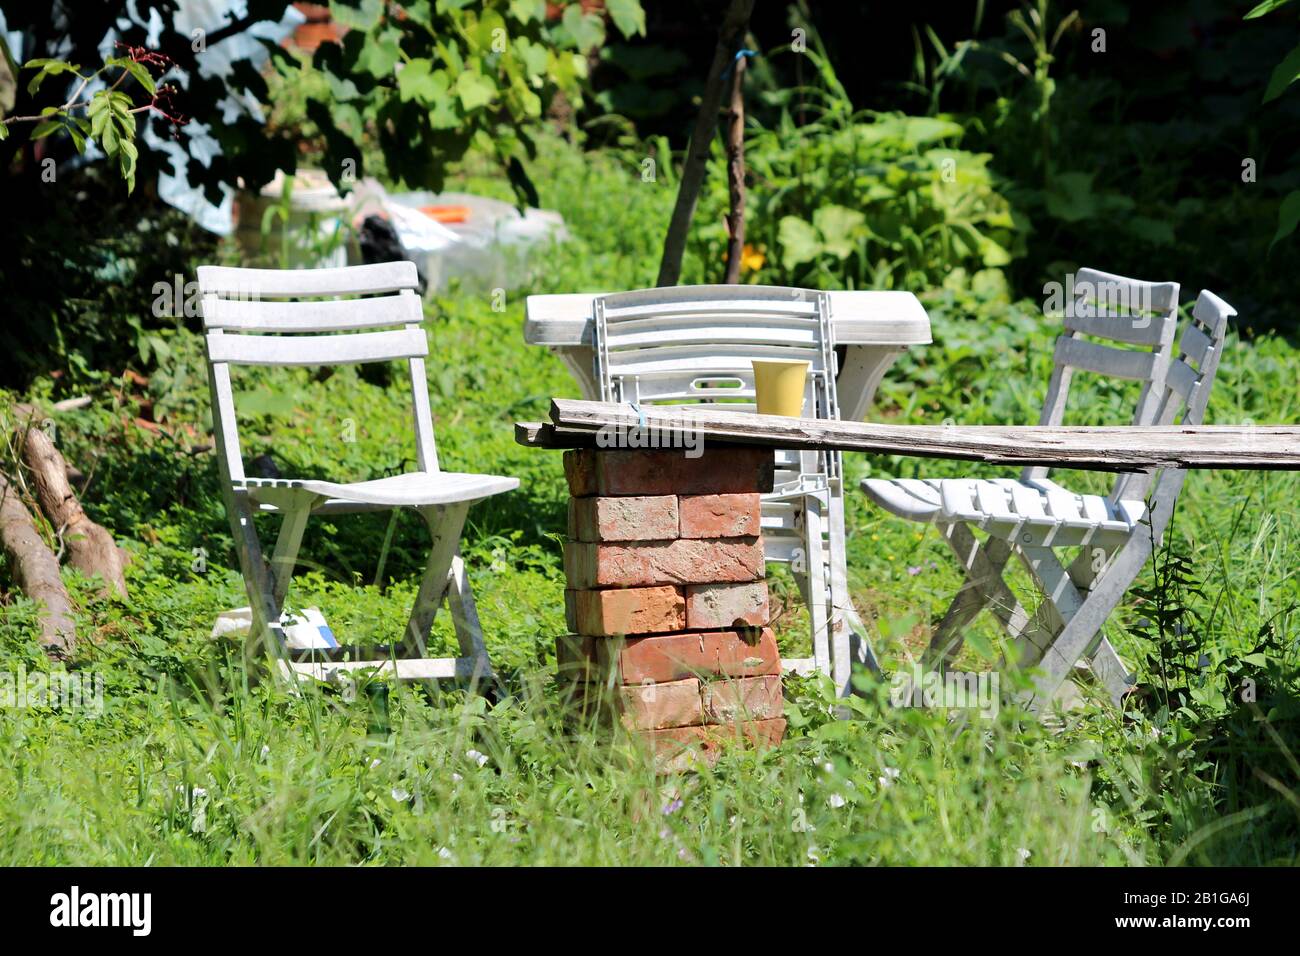 White old vintage retro wooden garden furniture next to improvised table supported by red bricks surrounded with uncut grass and garden plants Stock Photo